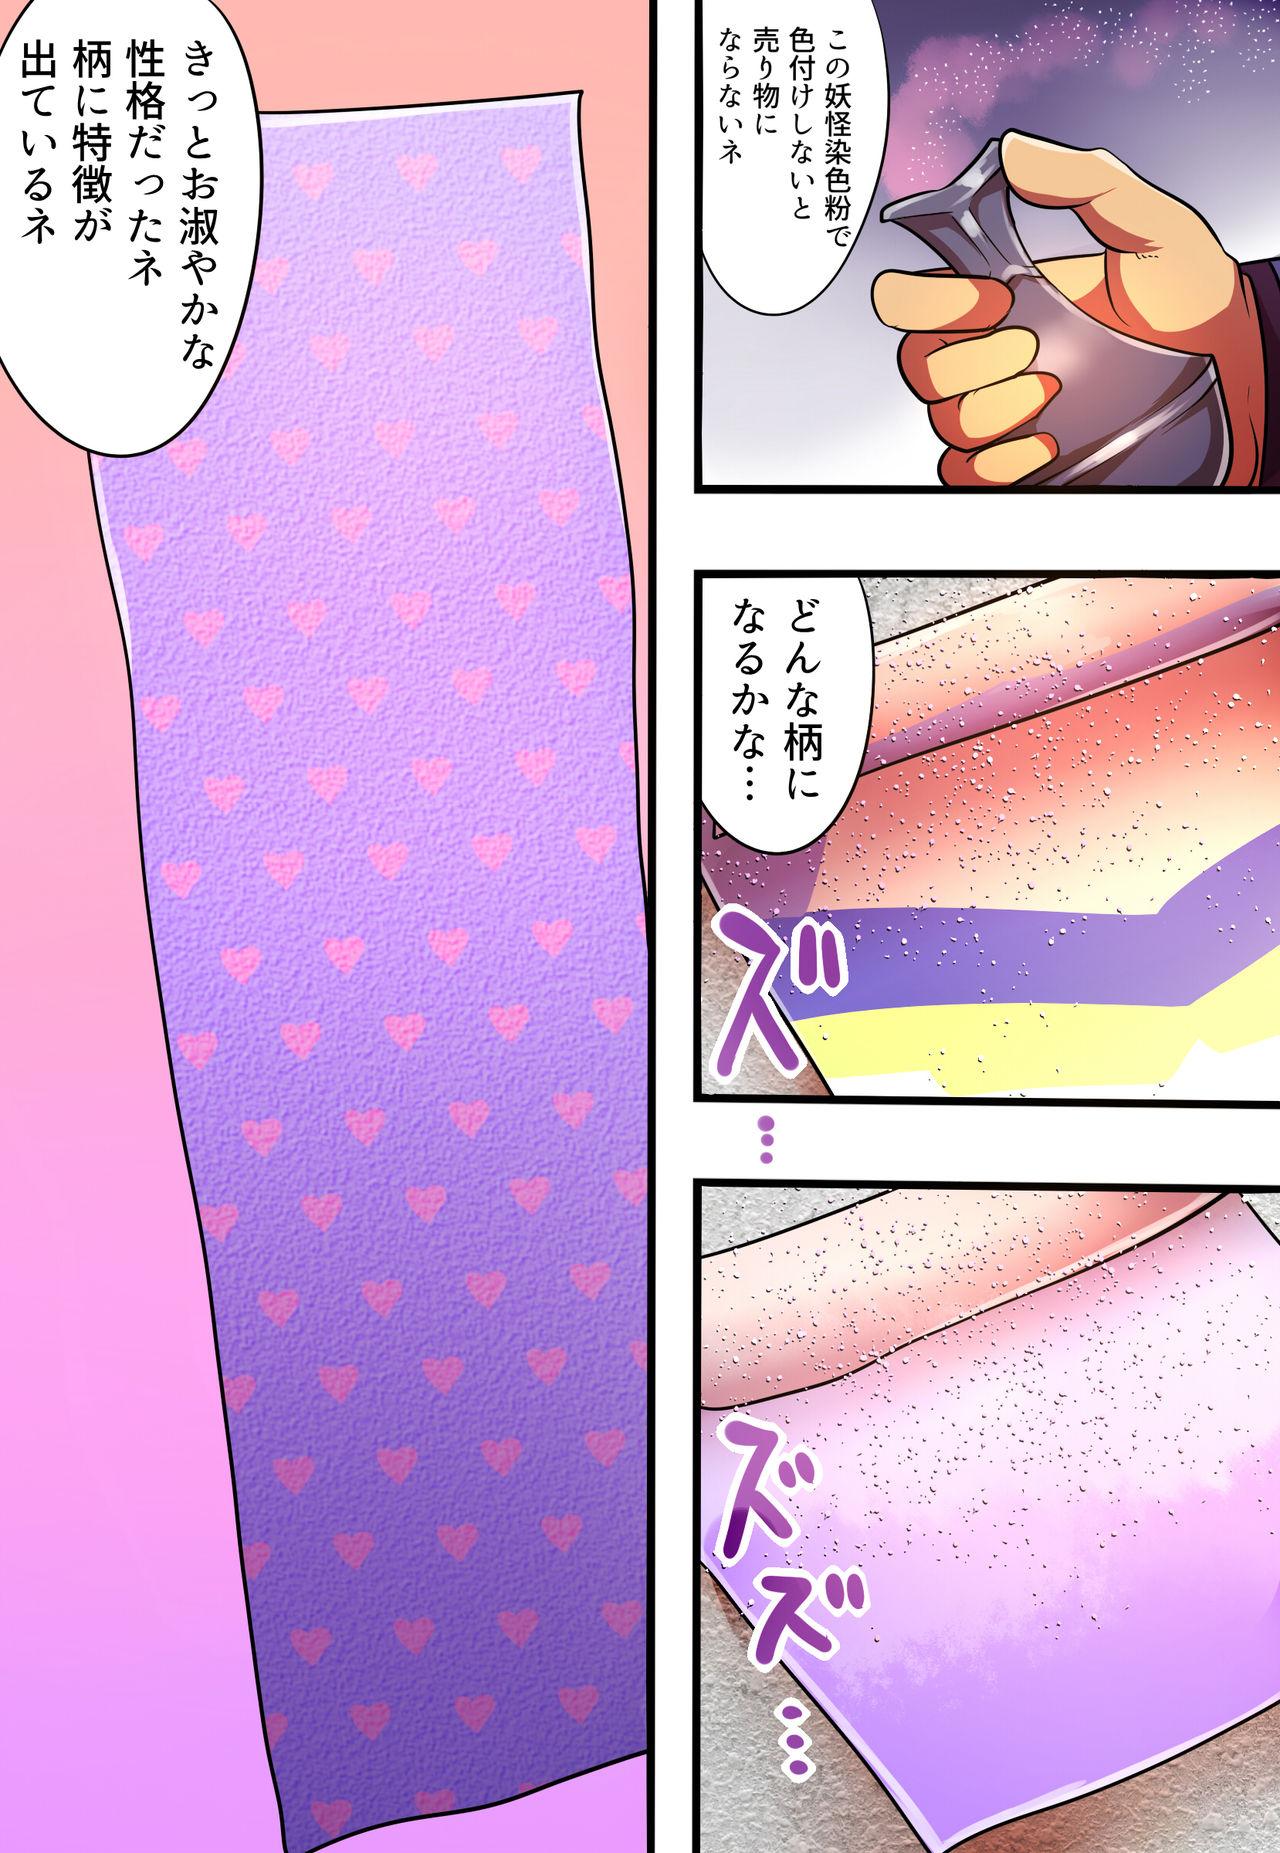 Gostosa shinenkan Comic of Textile-ification ghost storys Plug - Page 4